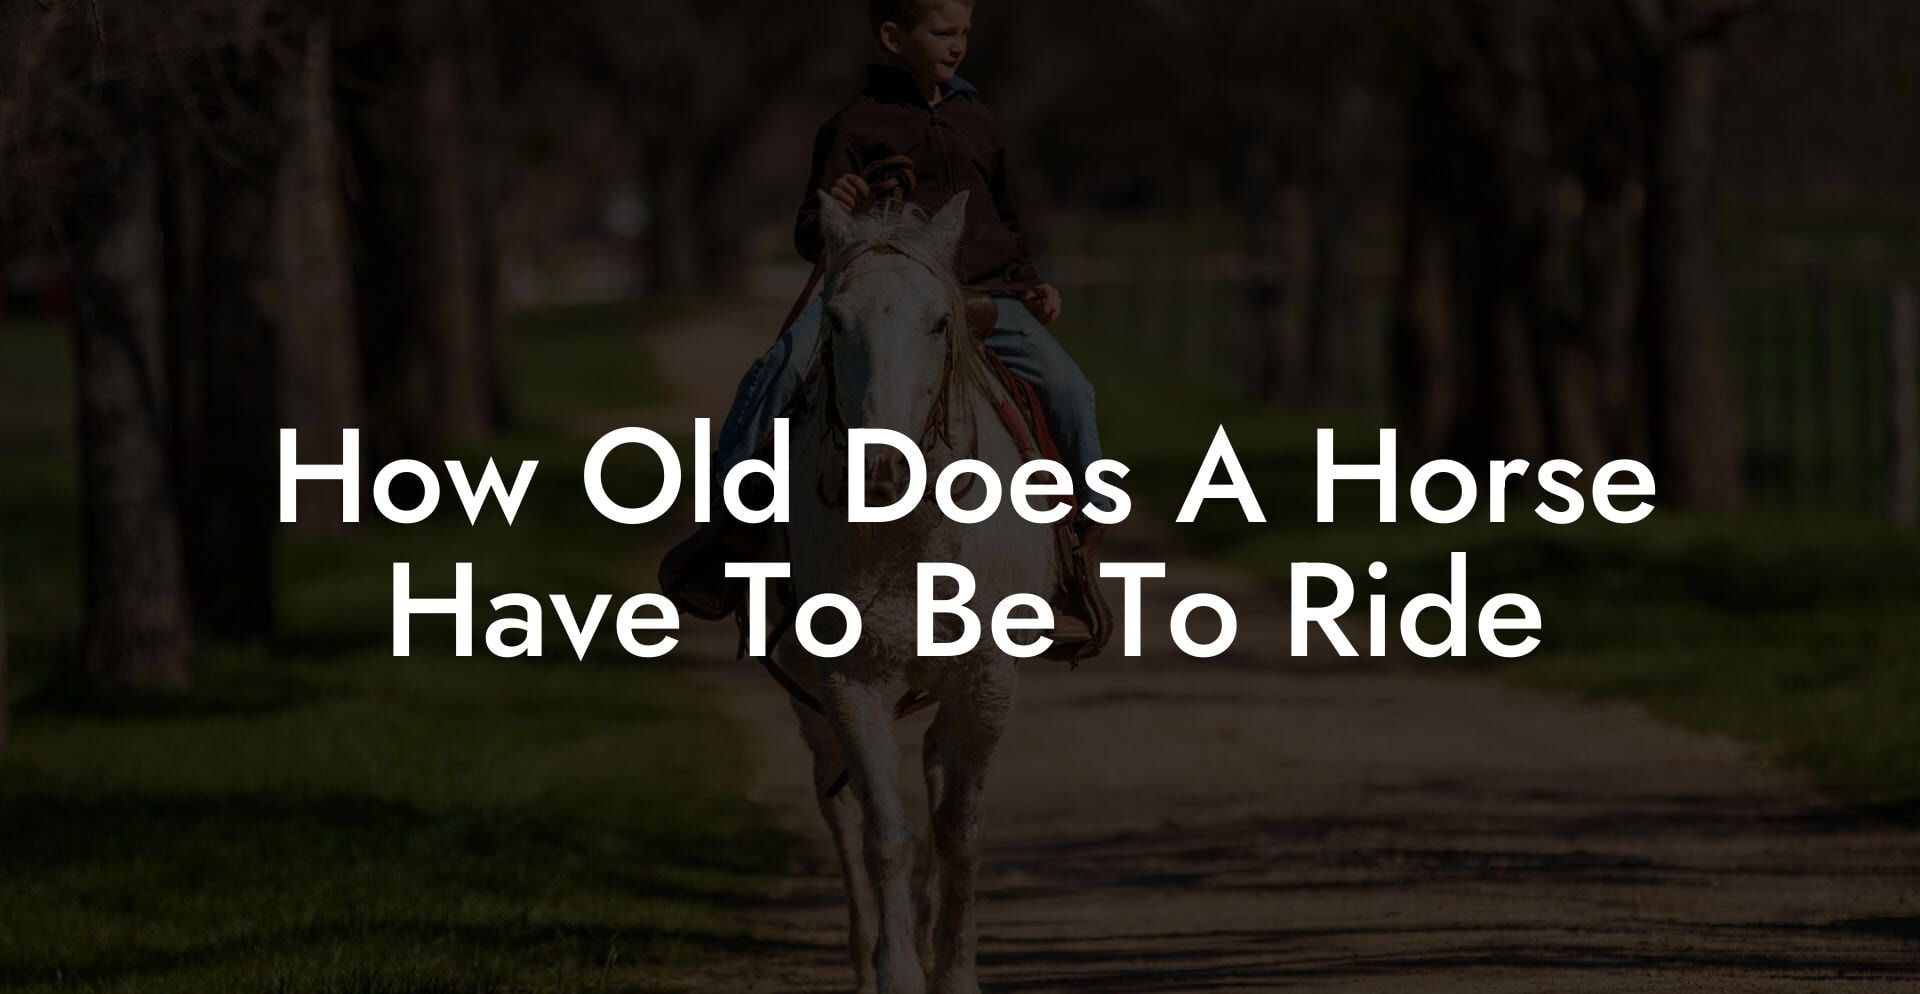 How Old Does A Horse Have To Be To Ride